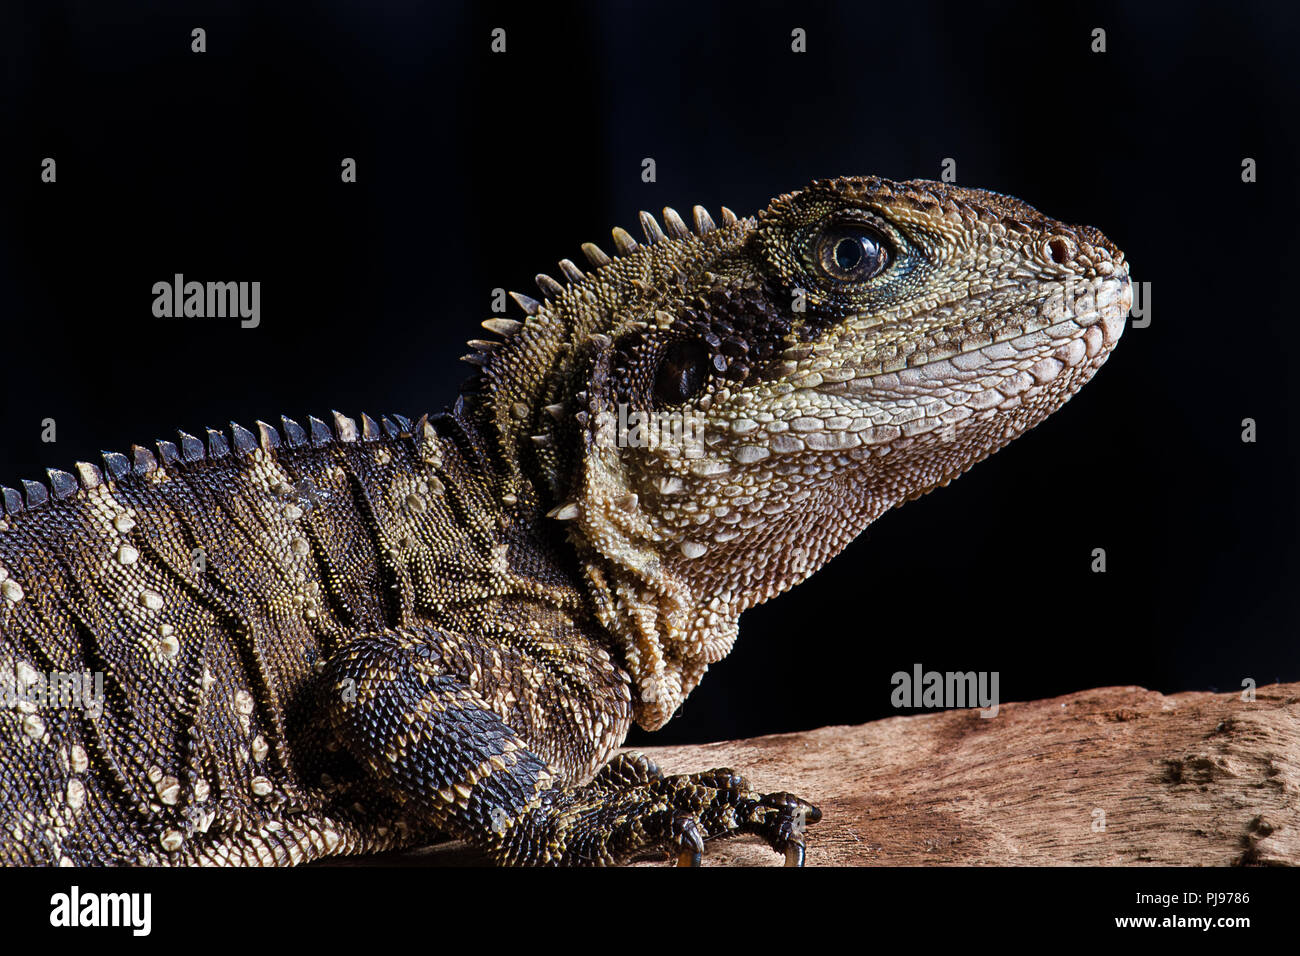 very close up photograph of an Australian water dragon. It shows the head and front part of the body against a black background. Stock Photo